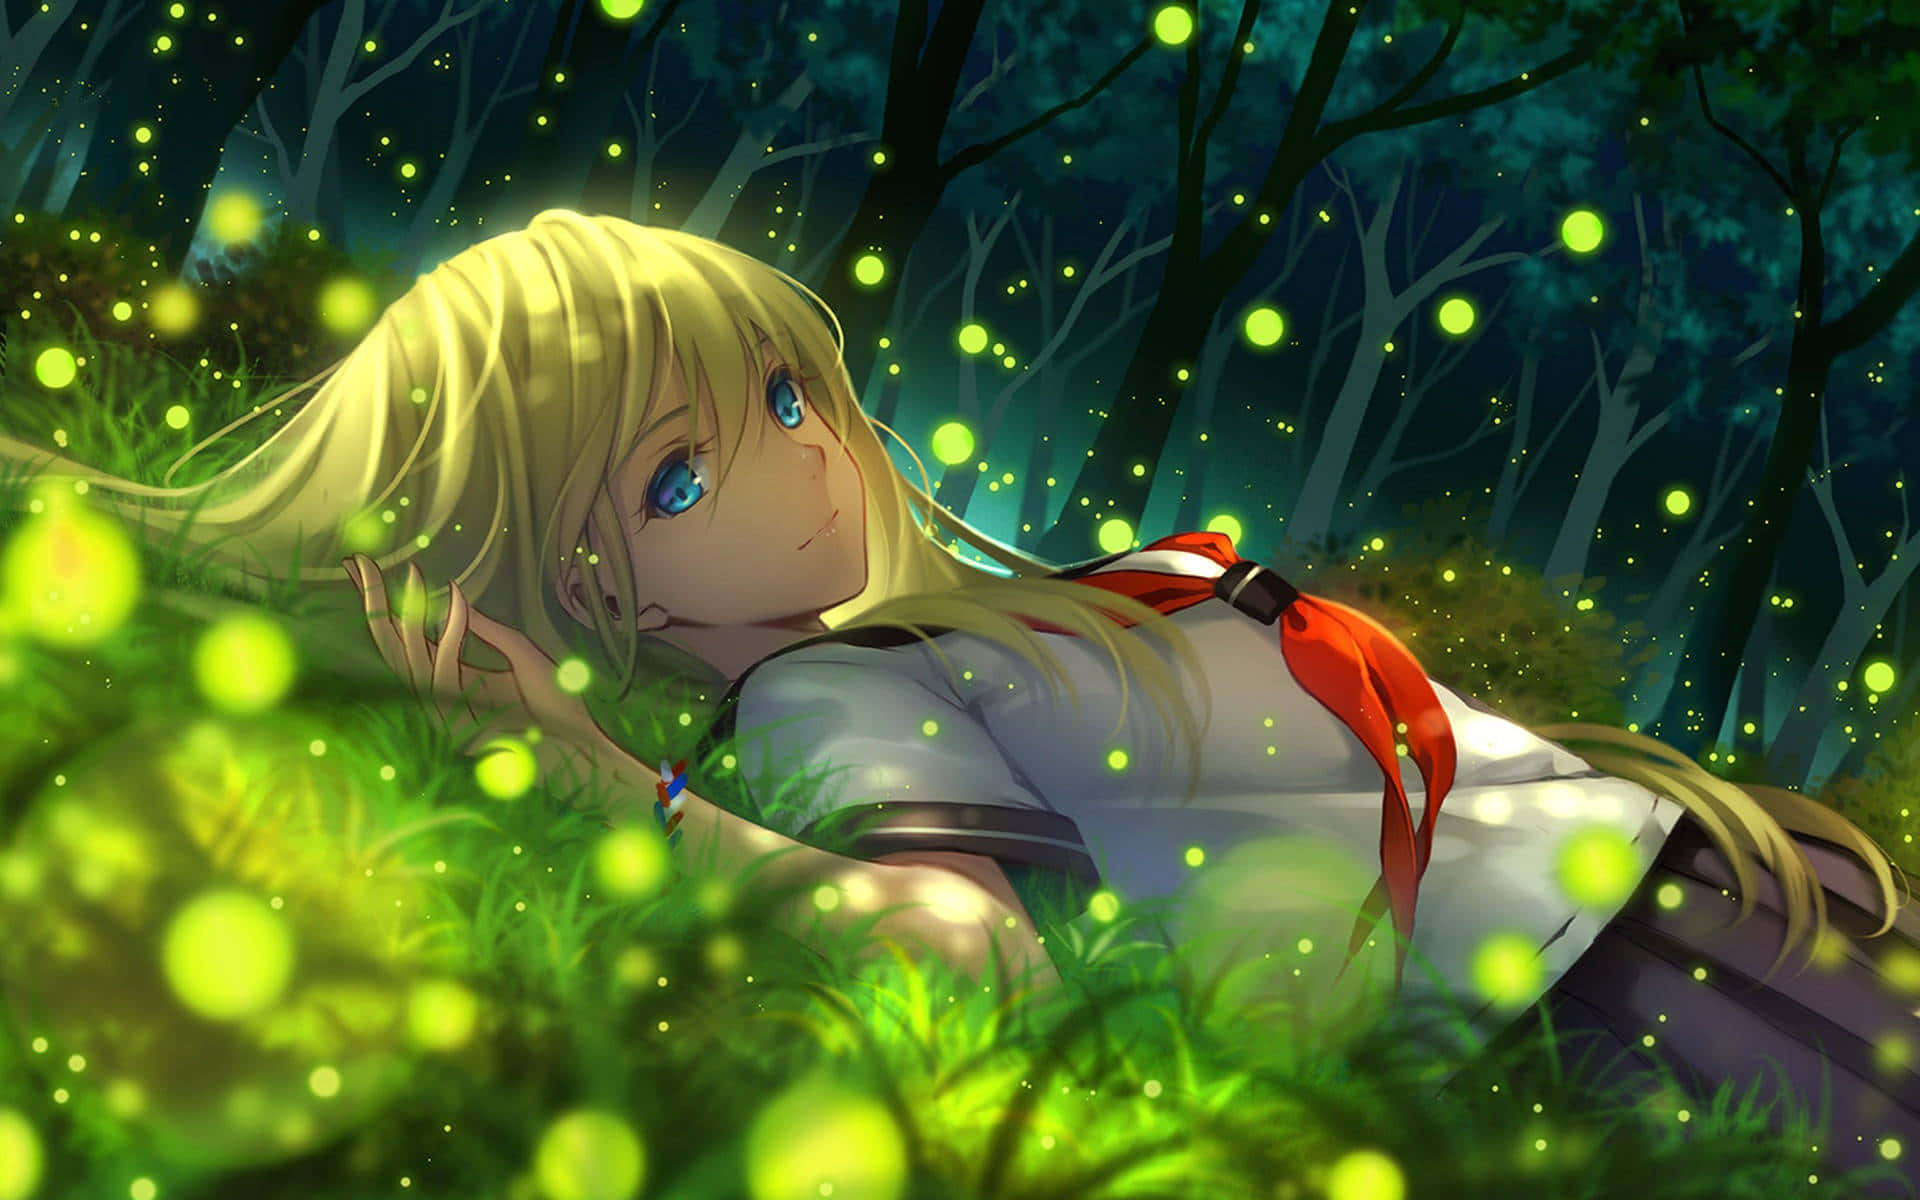 Anime Girl Stock Photos, Images and Backgrounds for Free Download